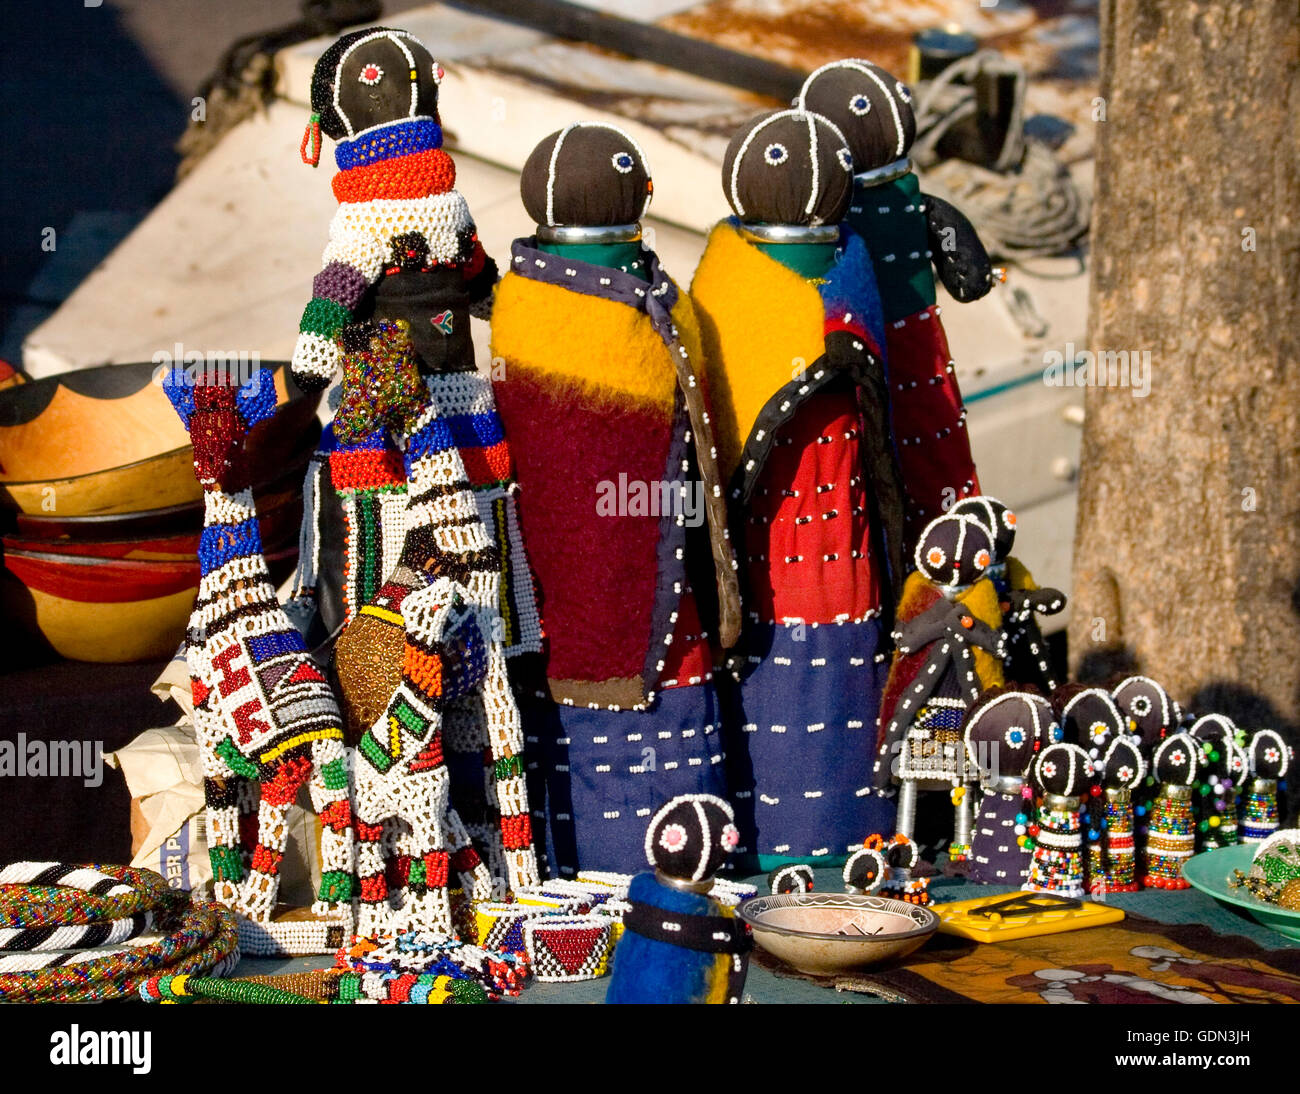 Ndebele craft for sale, South Africa Stock Photo - Alamy